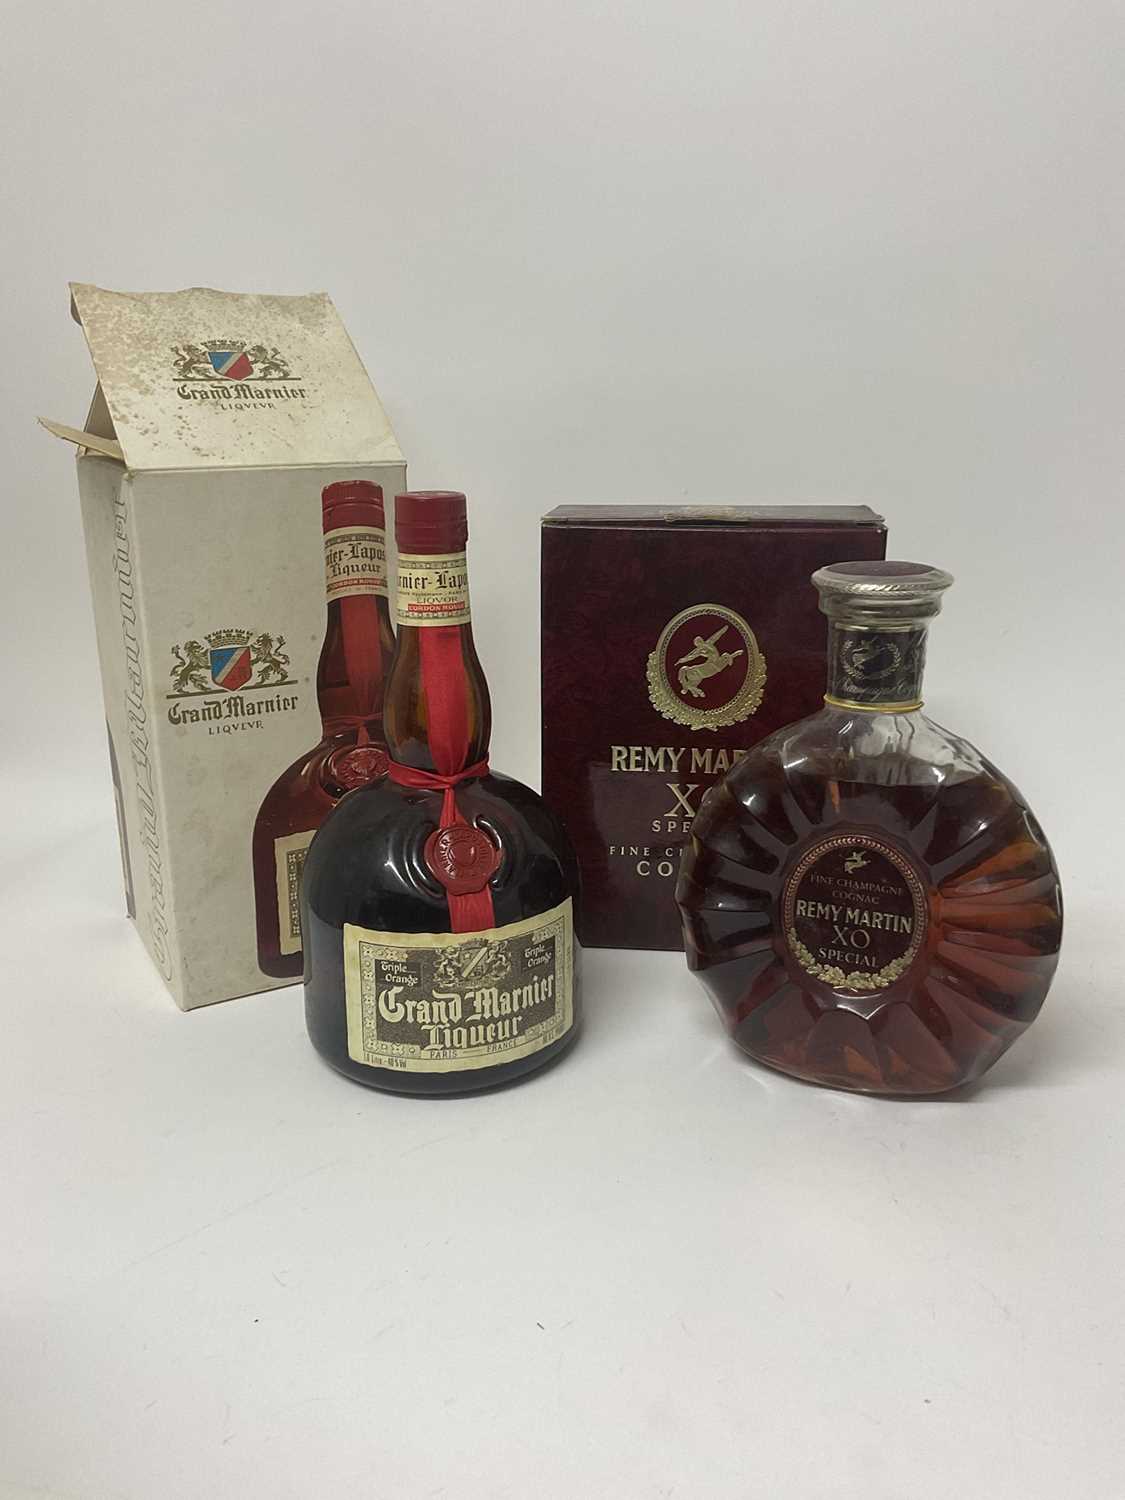 Lot 49 - Remy Martin XO Special Fine Champagne Cognac in box together with a bottle of Grand Marnier liqueur, 1 litre, boxed